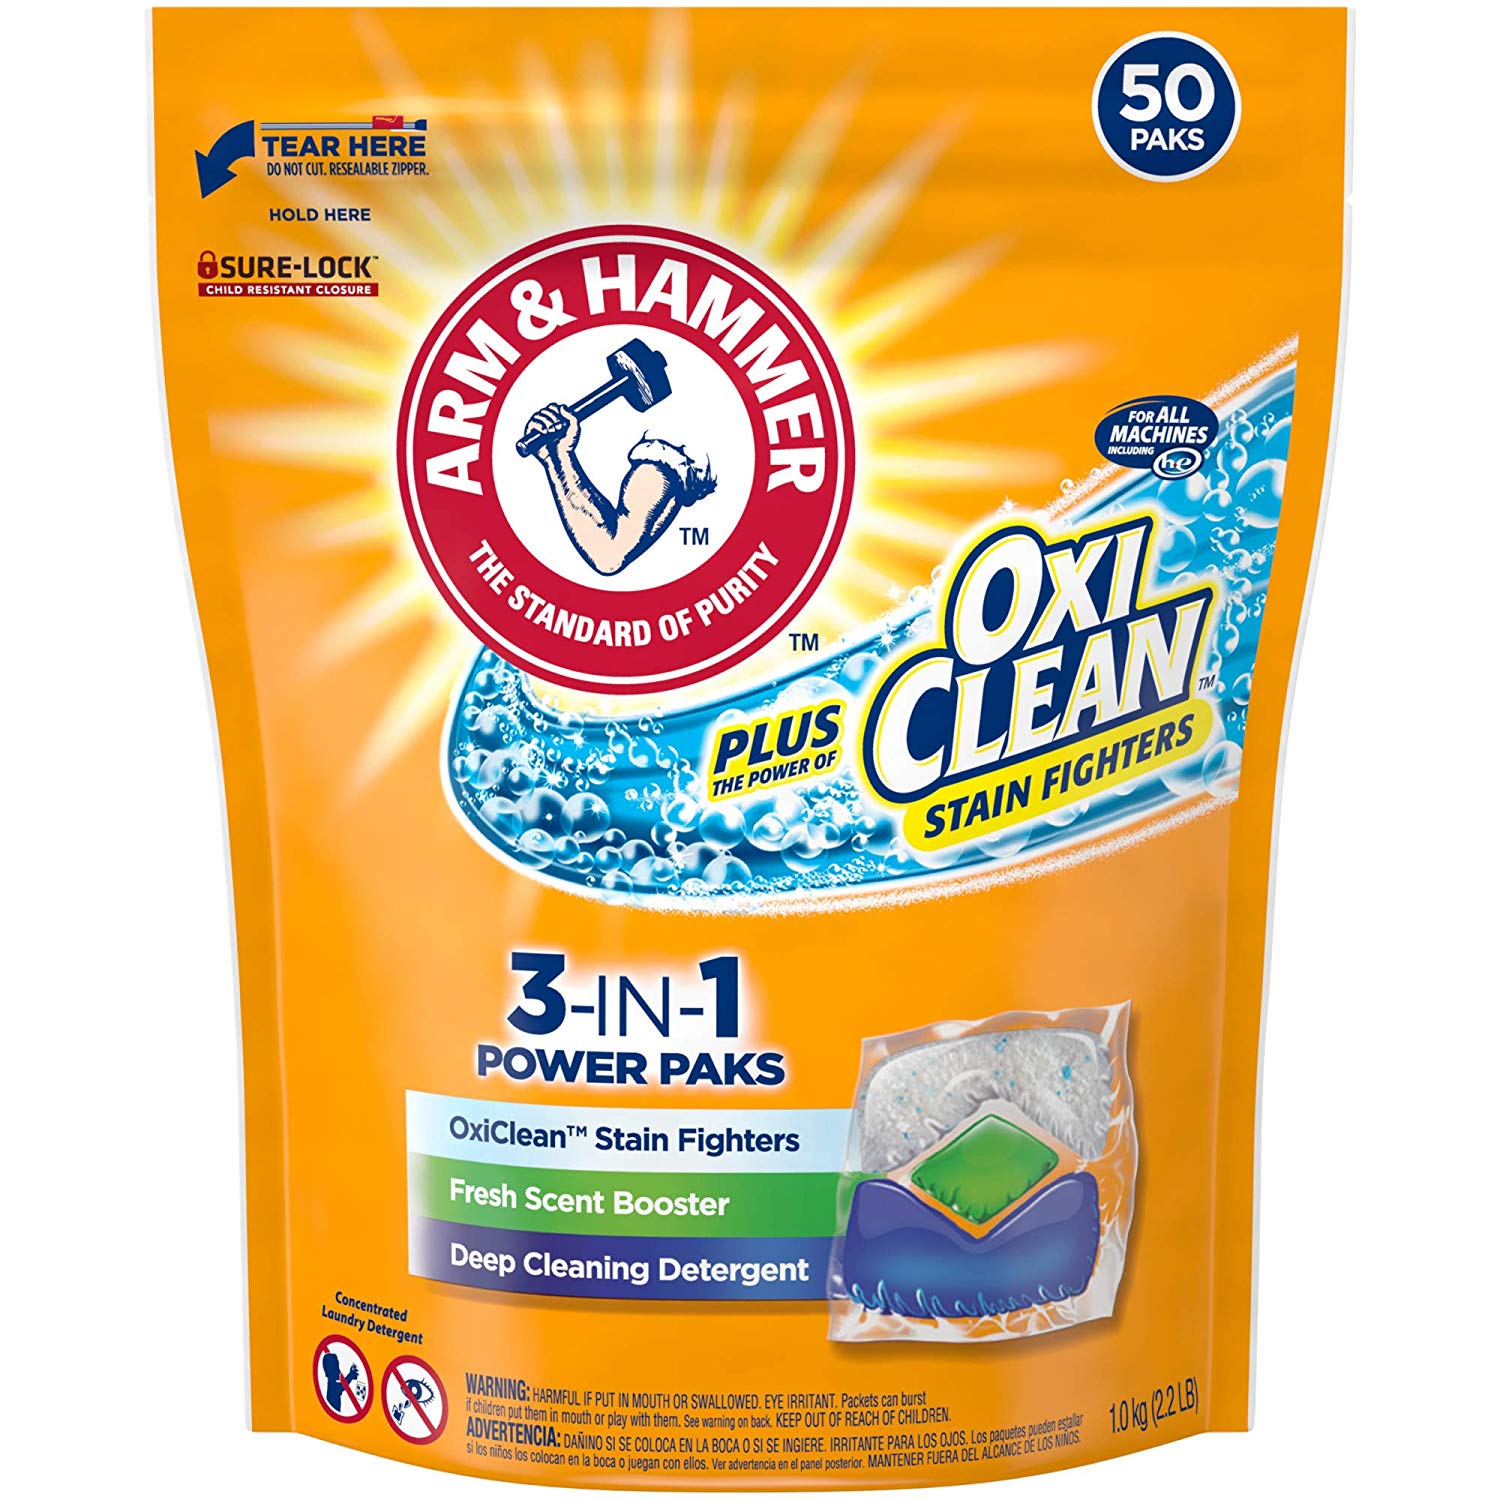 Arm & Hammer Plus OxiClean Laundry Detergent Power Paks, 50 Count – Only $9!